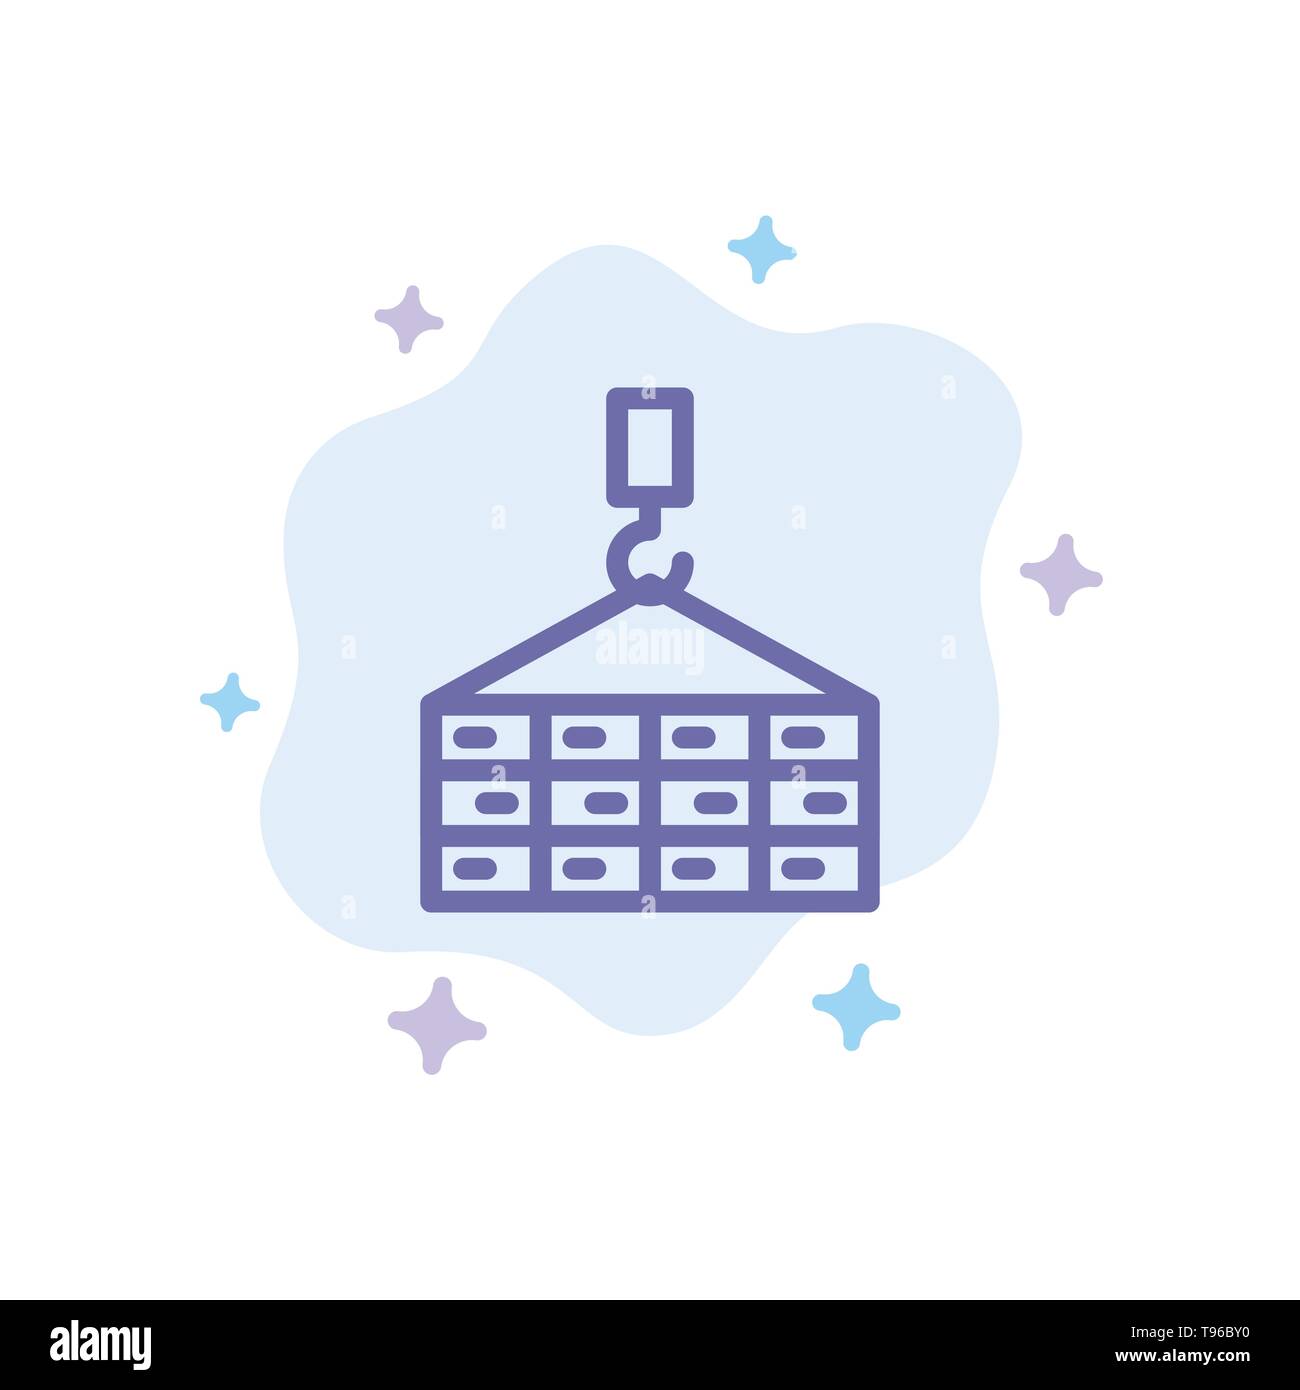 Building, Cargo, Construction, Crane Blue Icon on Abstract Cloud Background Stock Vector